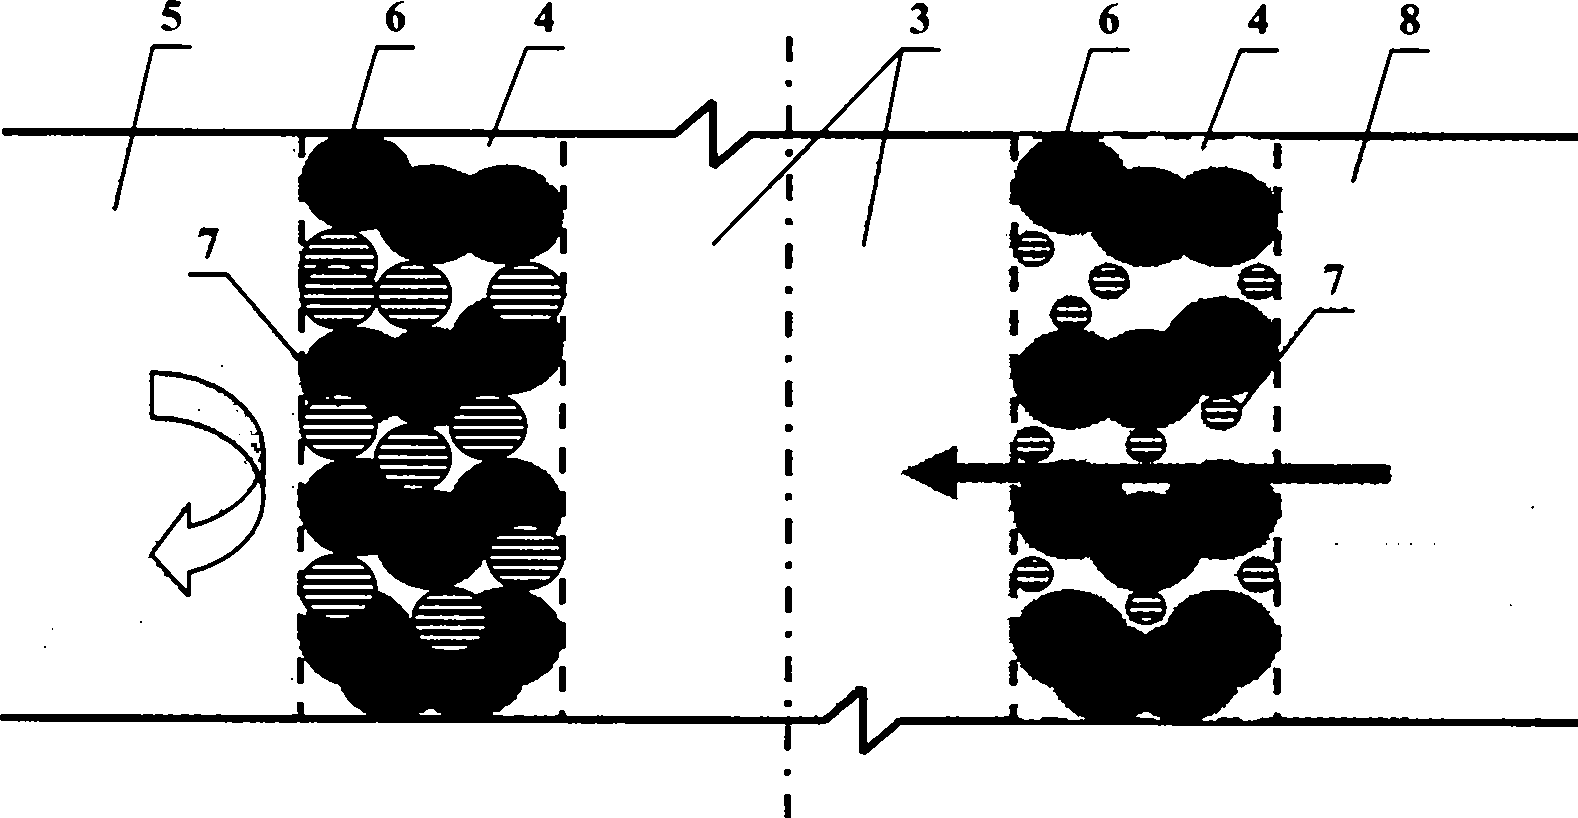 Selective permeable reactive barrier technique for controlling seawater invasion